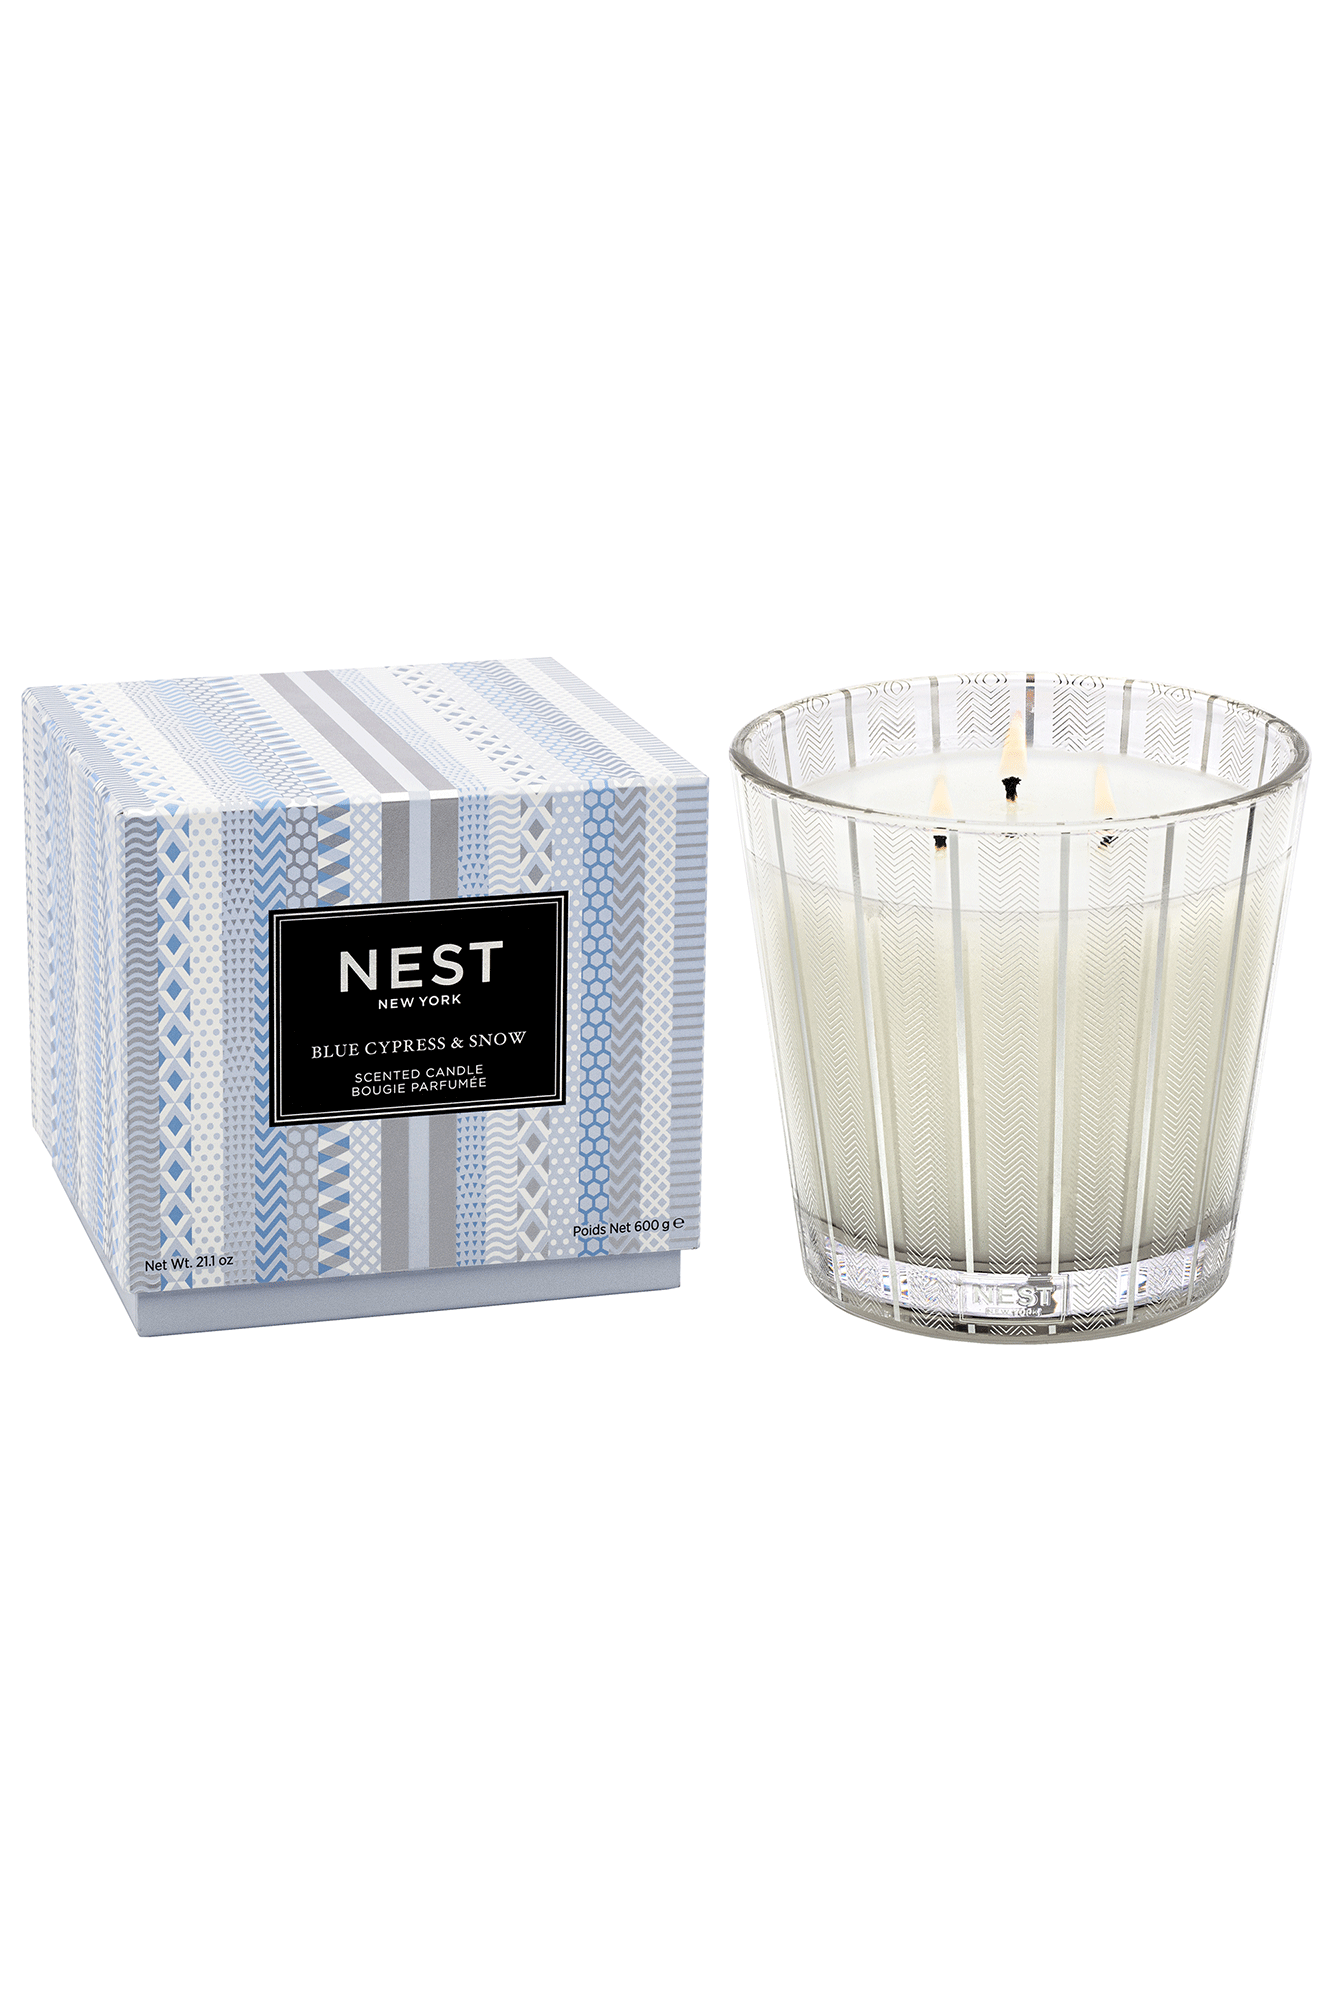 This beautiful Blue Cypress & Snow Classic Candle from Nest is perfect for adding an earthy yet warm aroma to your home. Enjoy top notes of blue cypress, juniper berry and a subtle hint of smoked vanilla bean. Create a unique winter mountain retreat atmosphere with this Classic Candle.